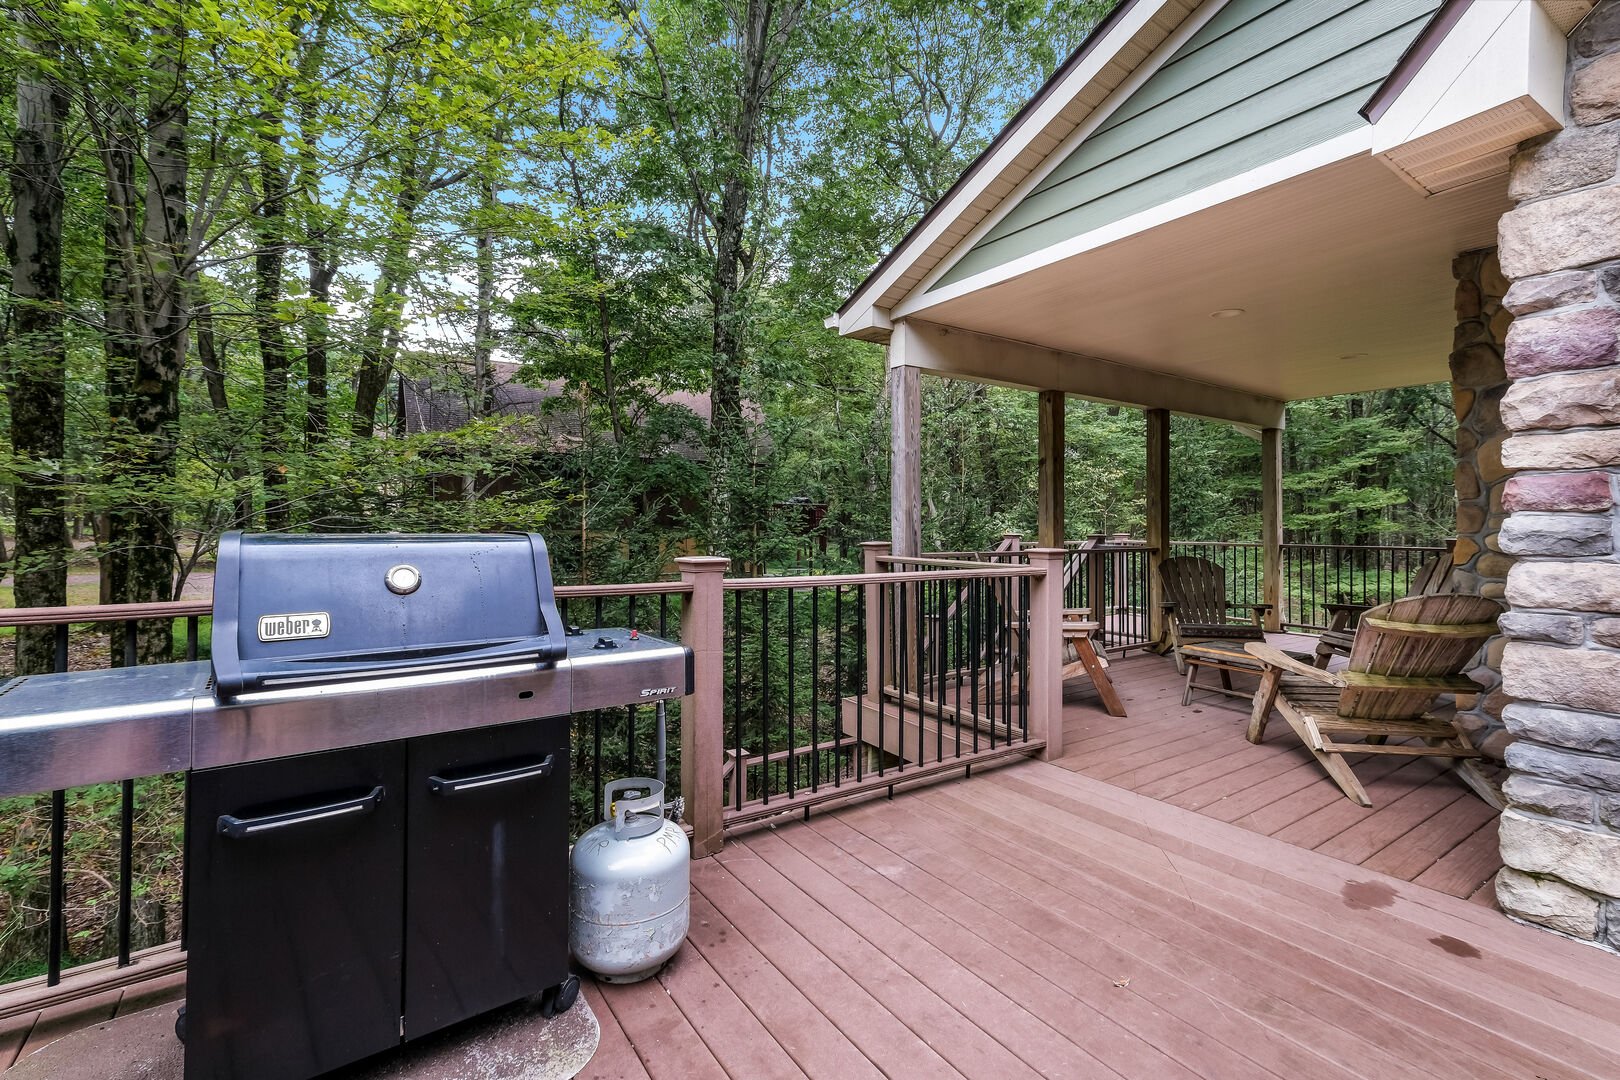 Grill and patio furniture on our Pocono Getaway Rental